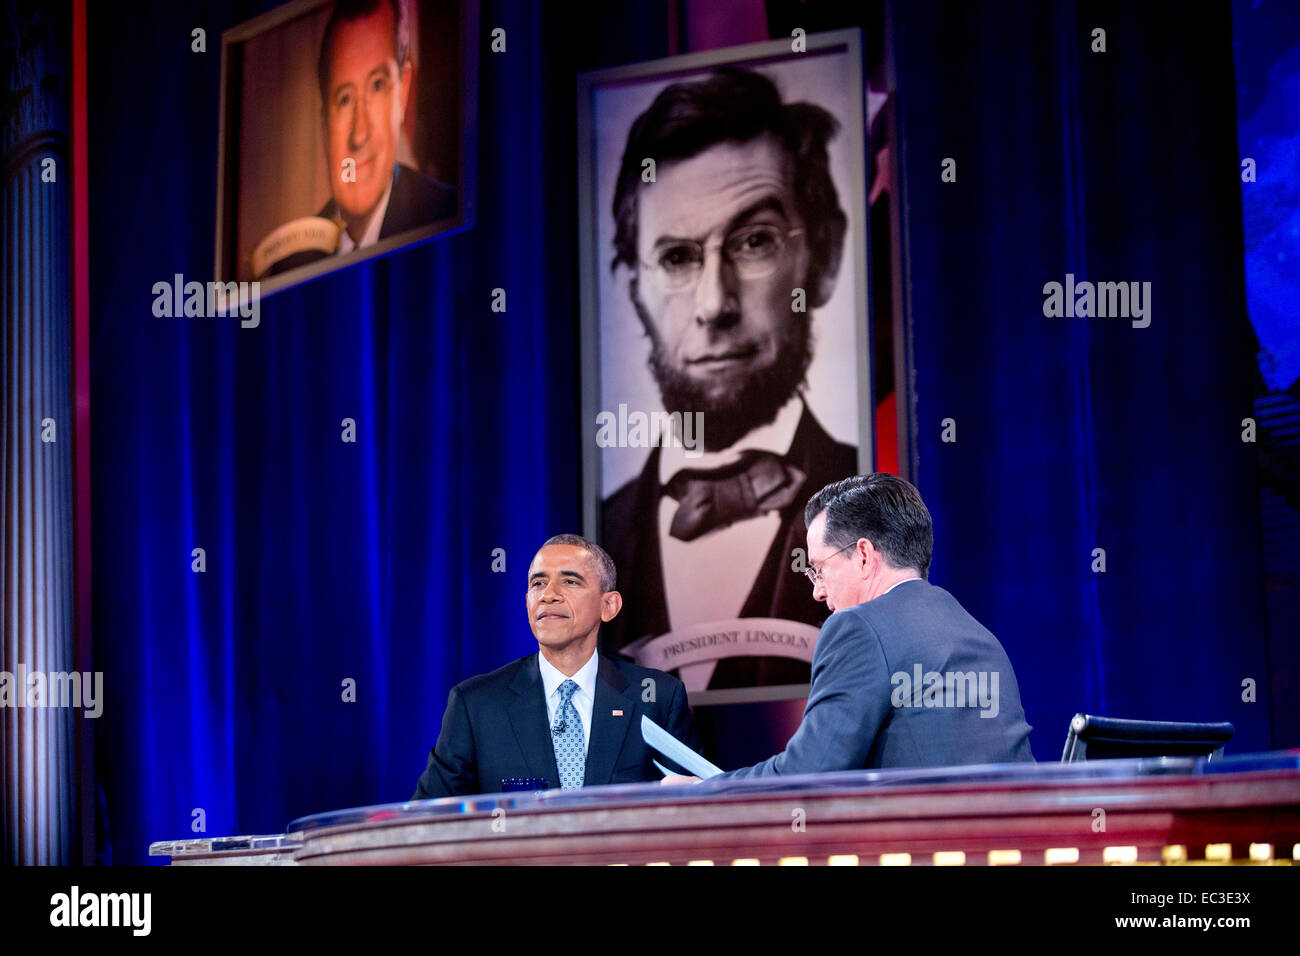 Washington, DC, USA. 8th Dec, 2014. United States President Barack Obama, left, tapes Comedy Central's 'The Colbert Report' with television personality Stephen Colbert in Lisner Auditorium on the campus of George Washington University in Washington, DC, U.S., on Monday, December 8, 2014. This is President Obama's third appearance on 'The Colbert Report' that will broadcast its final show on December 18, 2014. Credit:  dpa picture alliance/Alamy Live News Stock Photo